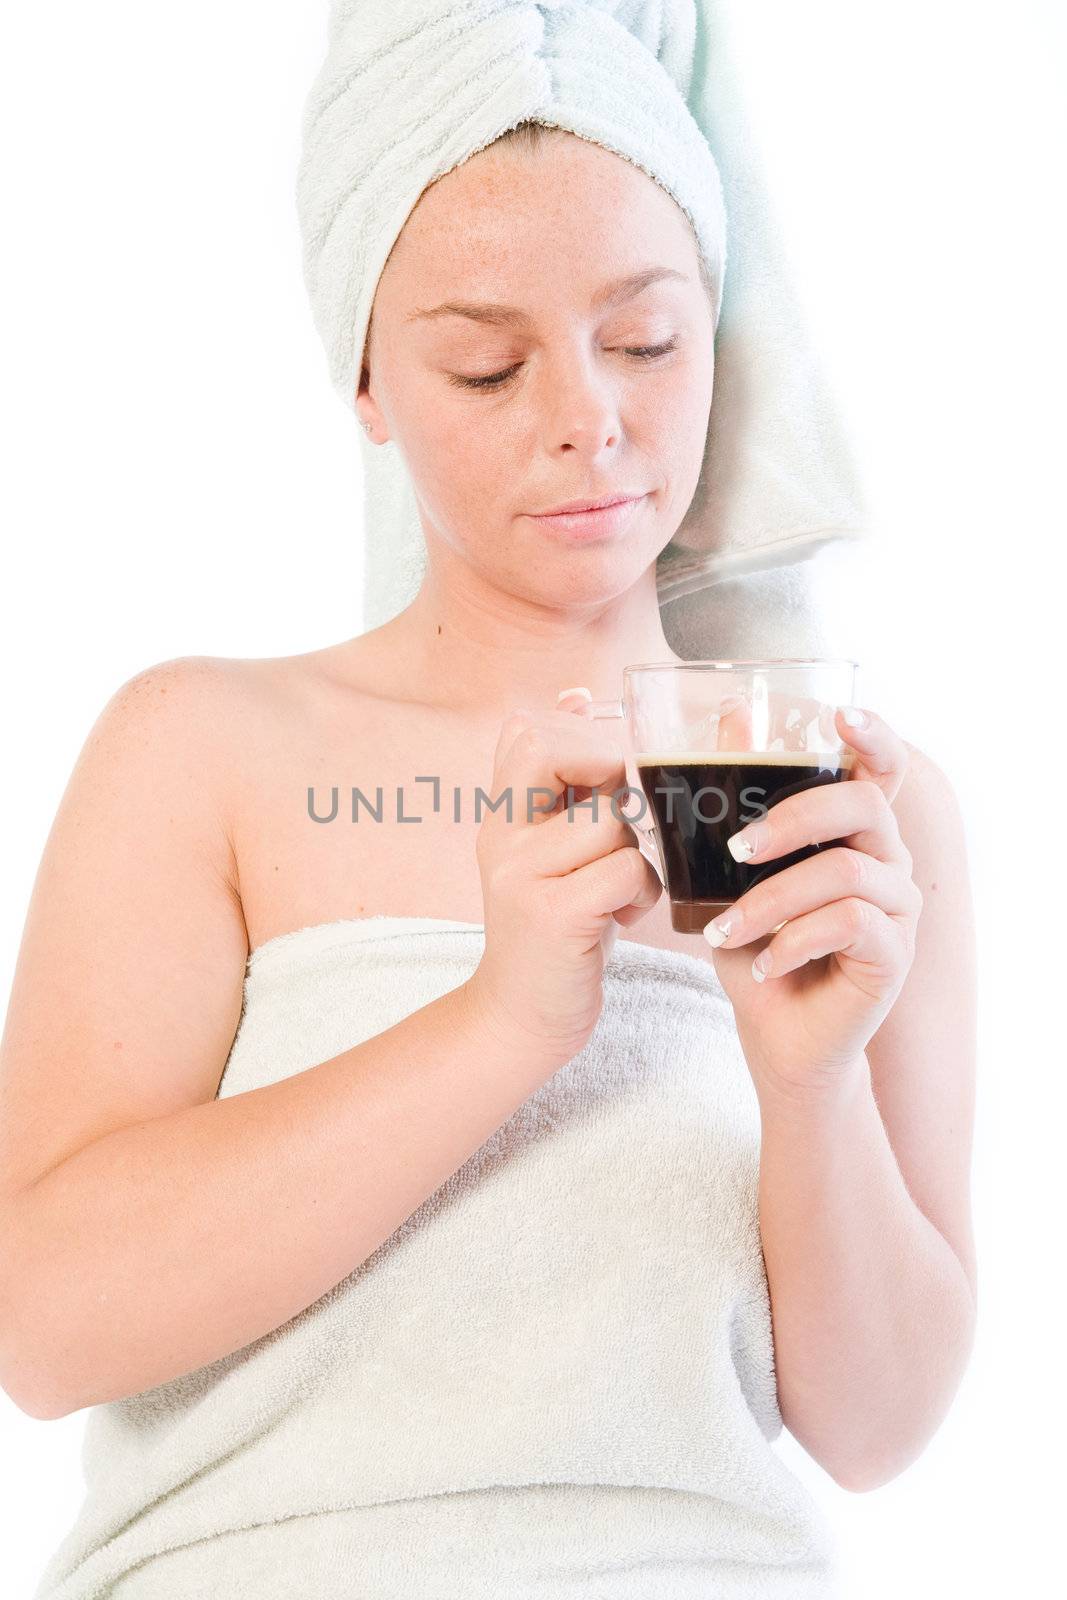 Studio portrait of a spa girl drinking coffee out of a glass